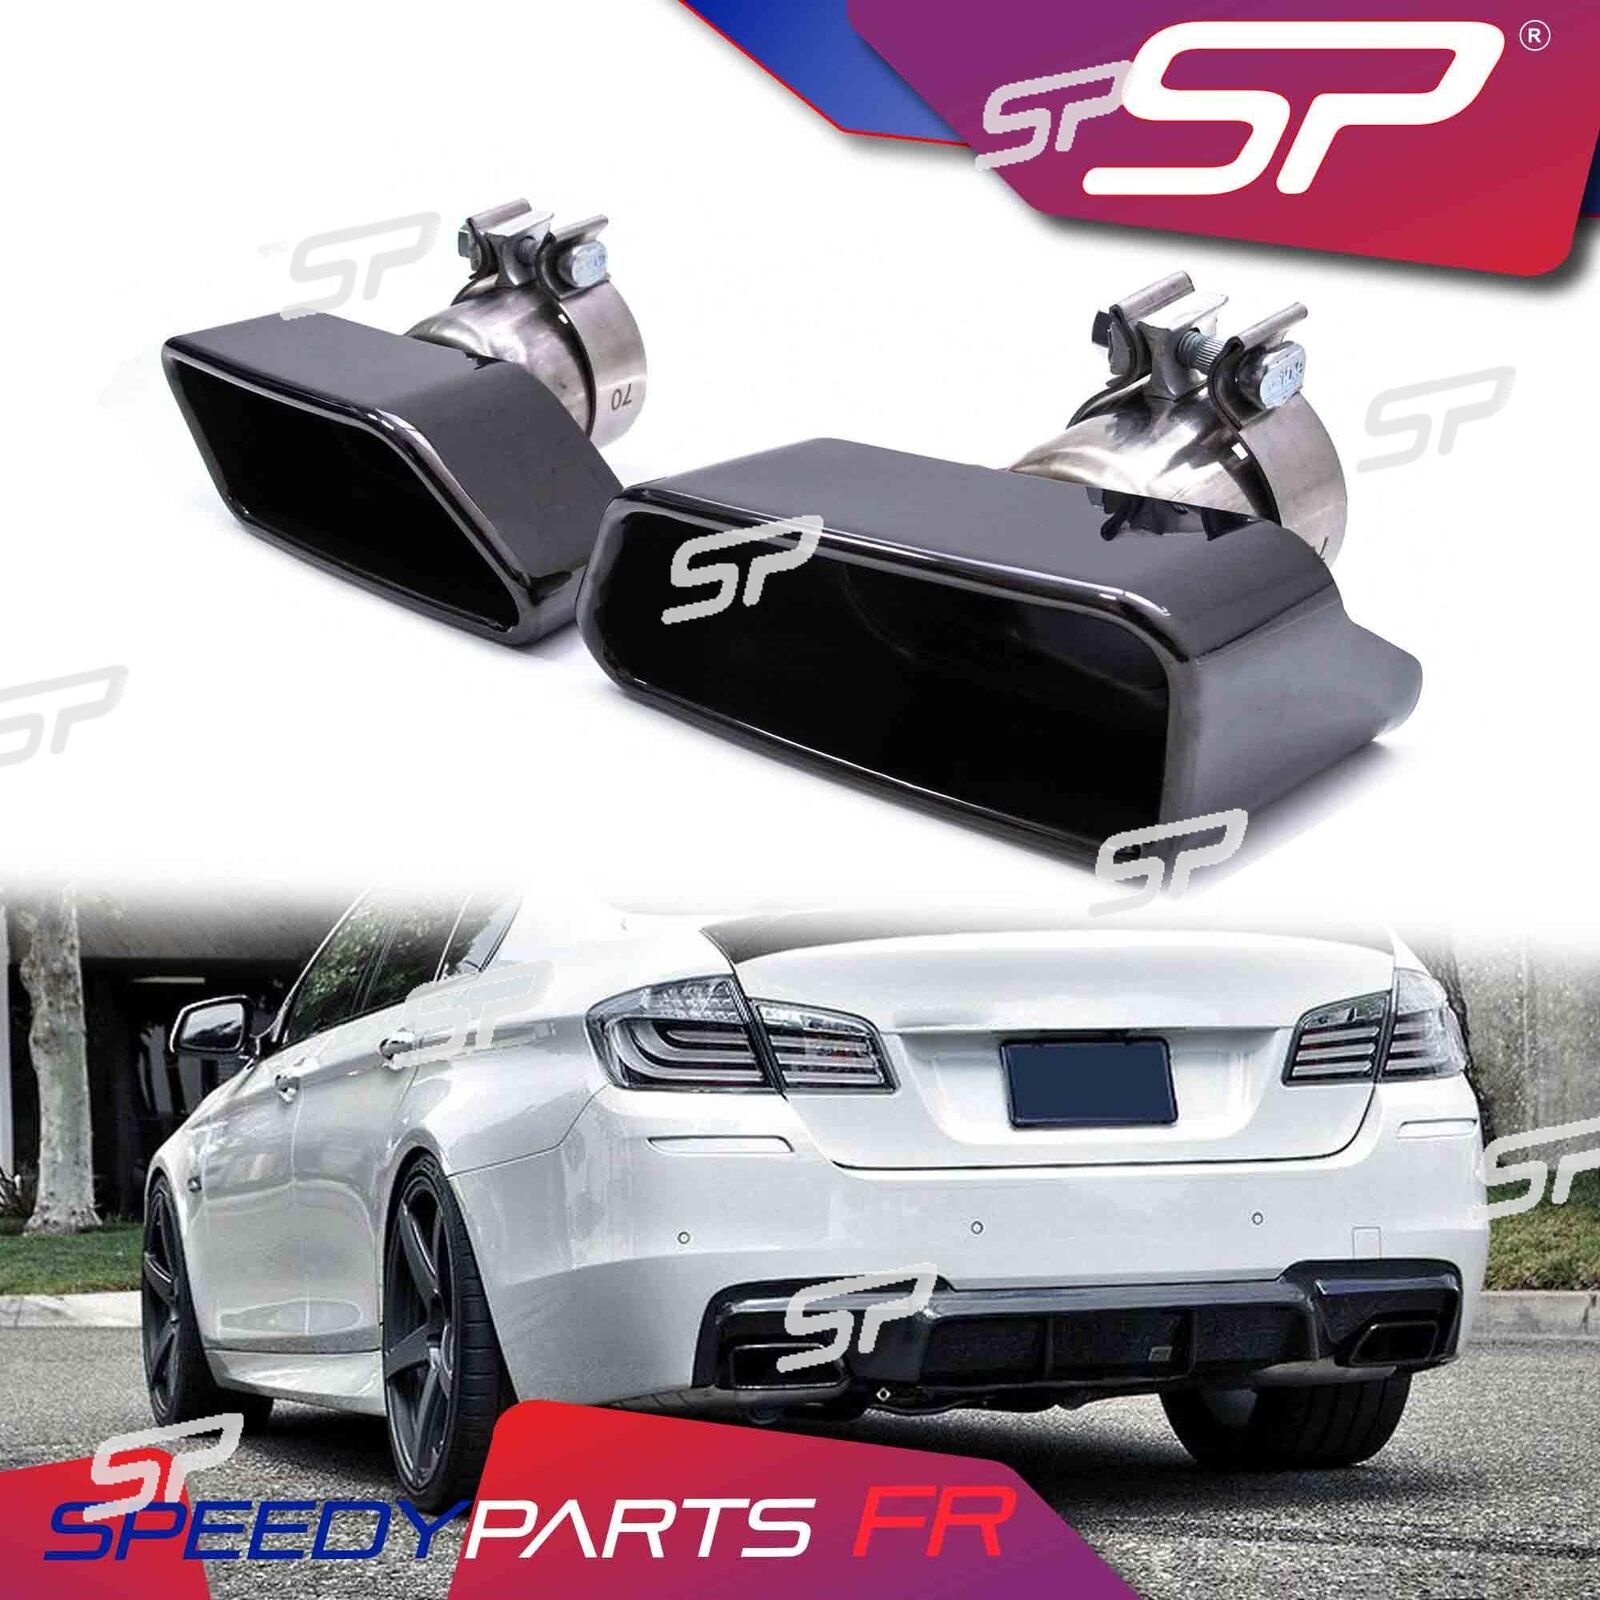 Sporty Exhaust Tips Black for 11-16 BMW 5 Series F10 F11 528i 535i M sport